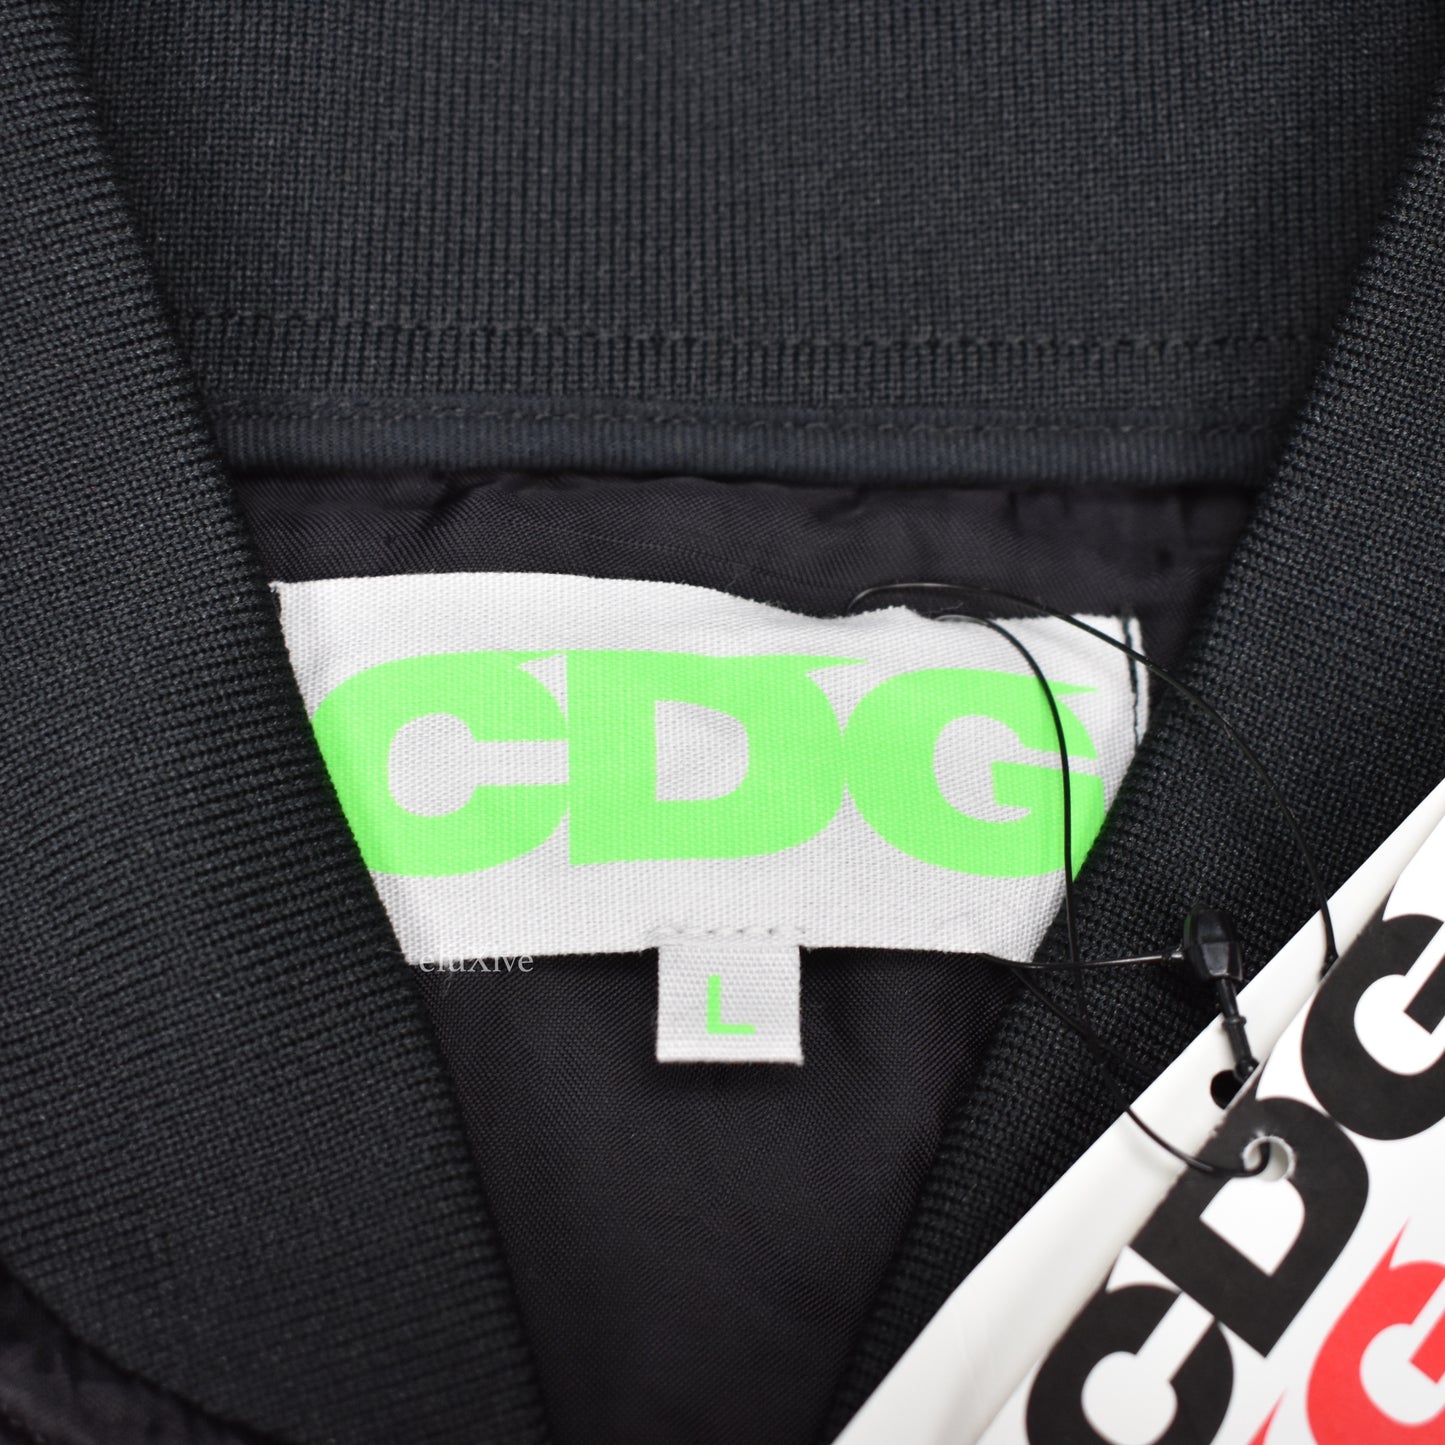 Comme des Garcons - CDG Breaking News A/W '84-'85 Staff Jacket